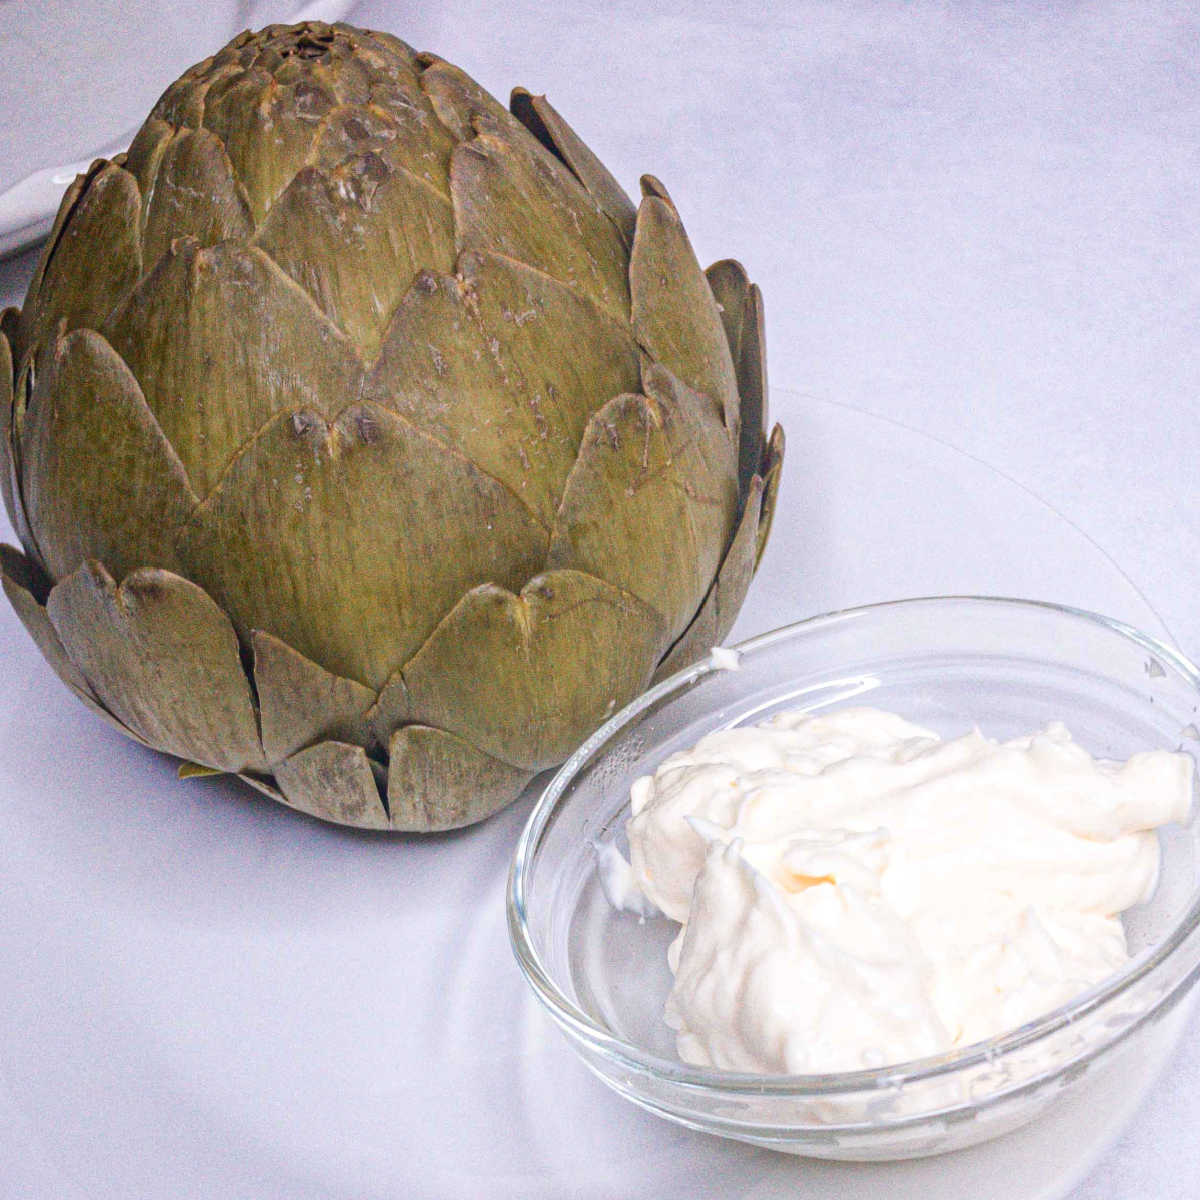 Cooked artichoke on a white plate with a small bowl of mayonnaise dip.